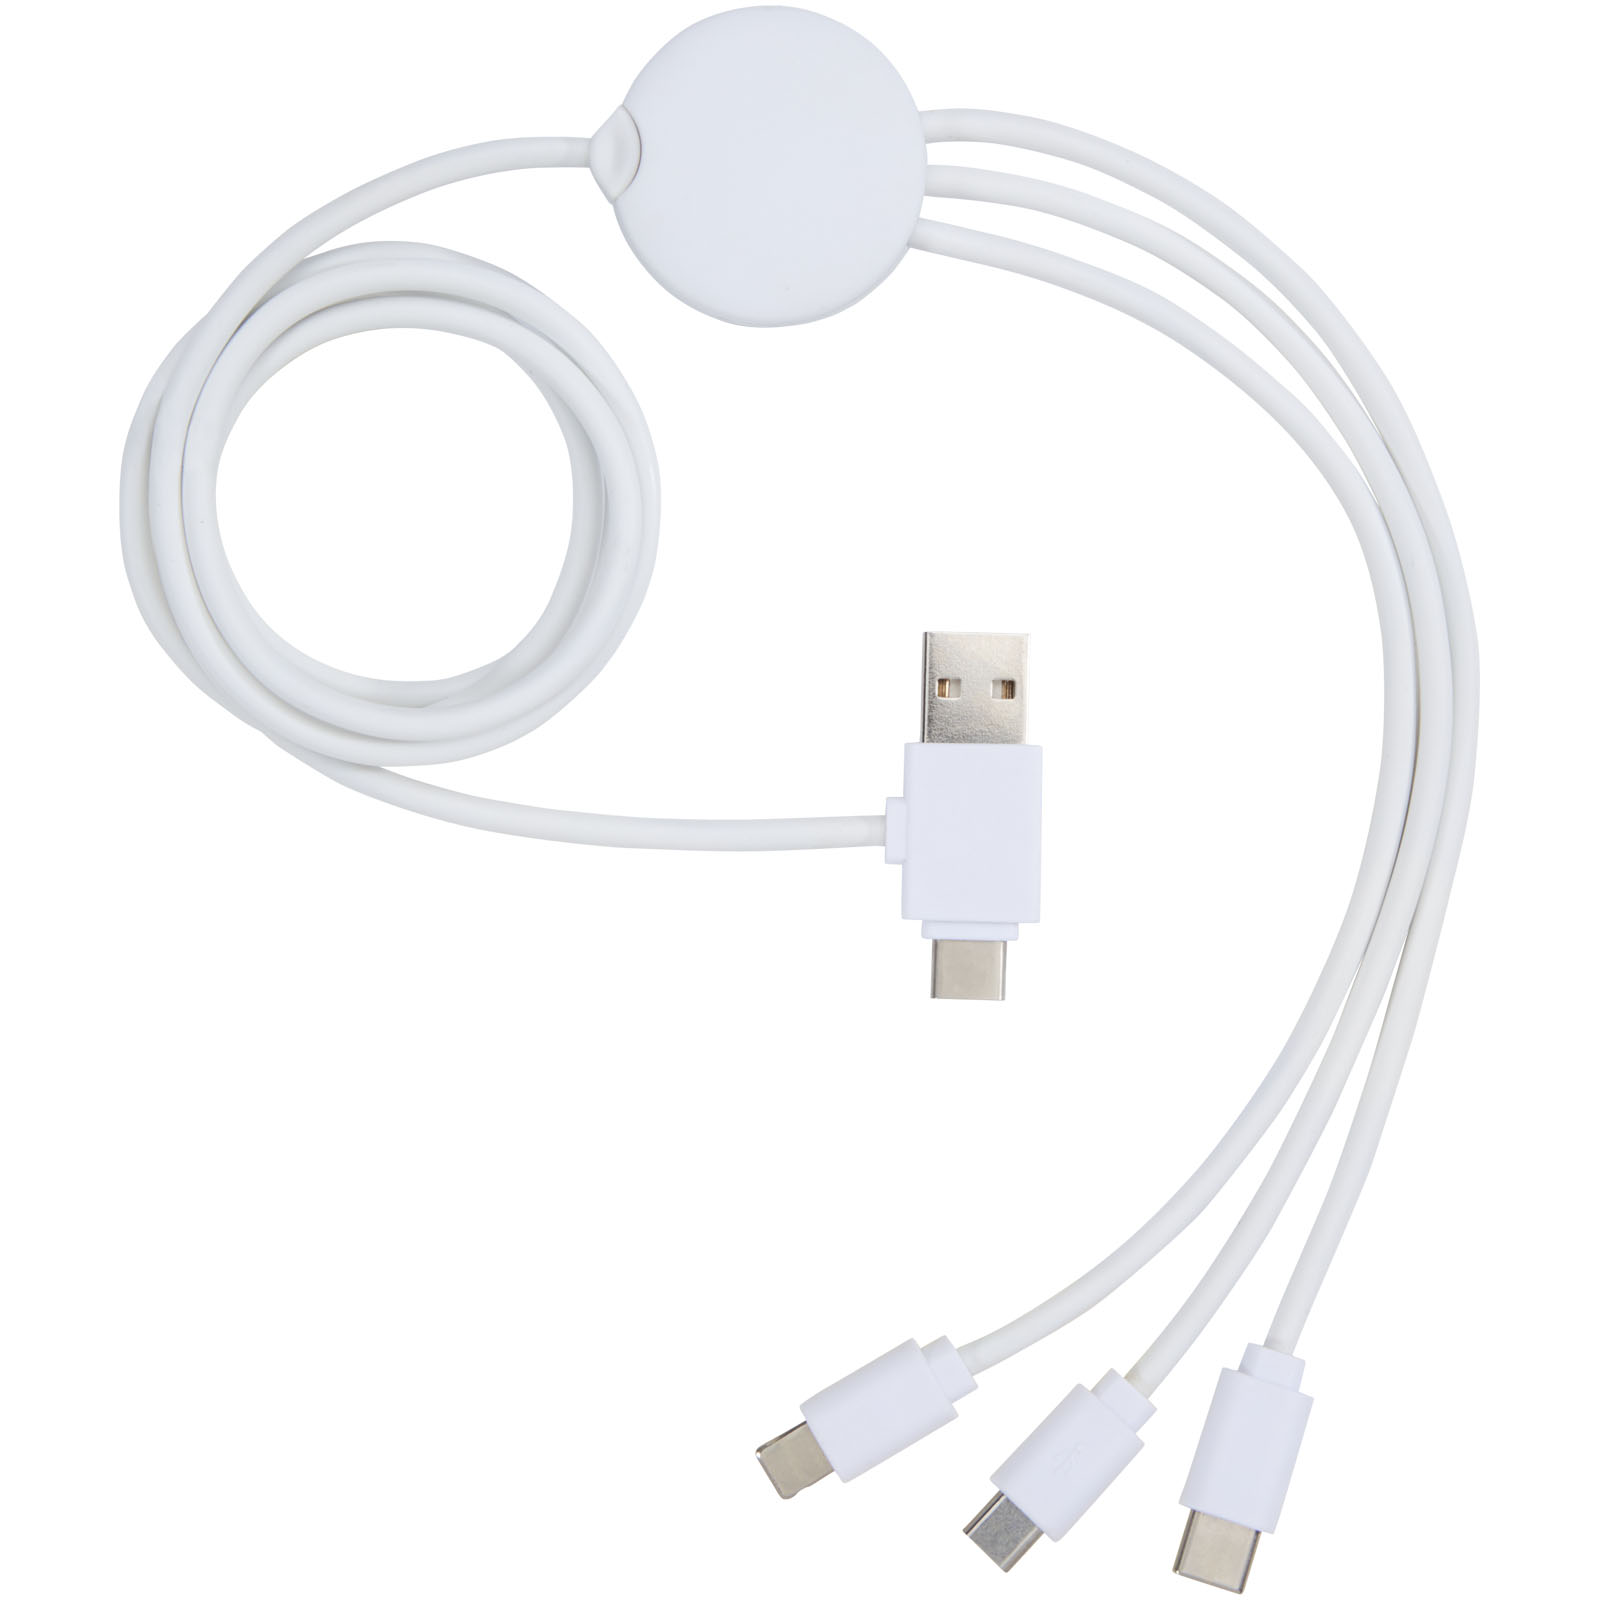 Advertising Cables - Pure 5-in-1 charging cable with antibacterial additive - 2